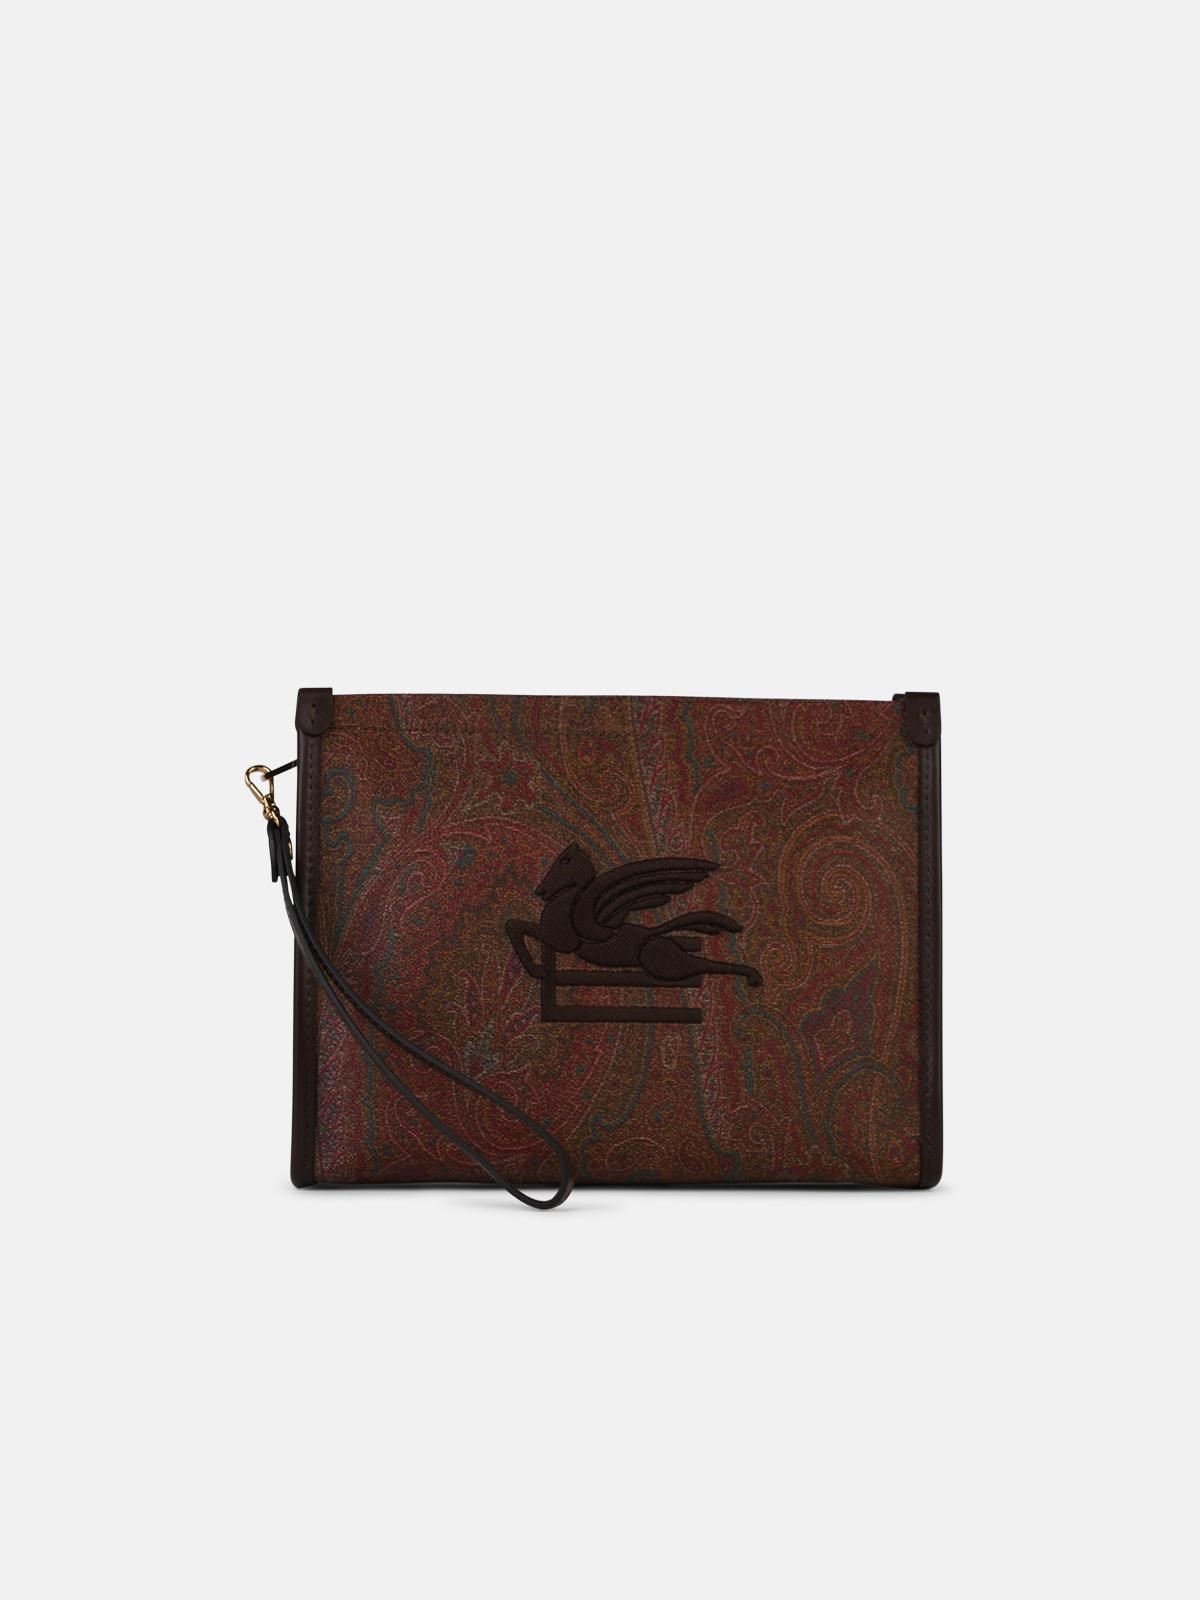 Etro Brown Leather Clutch Bag